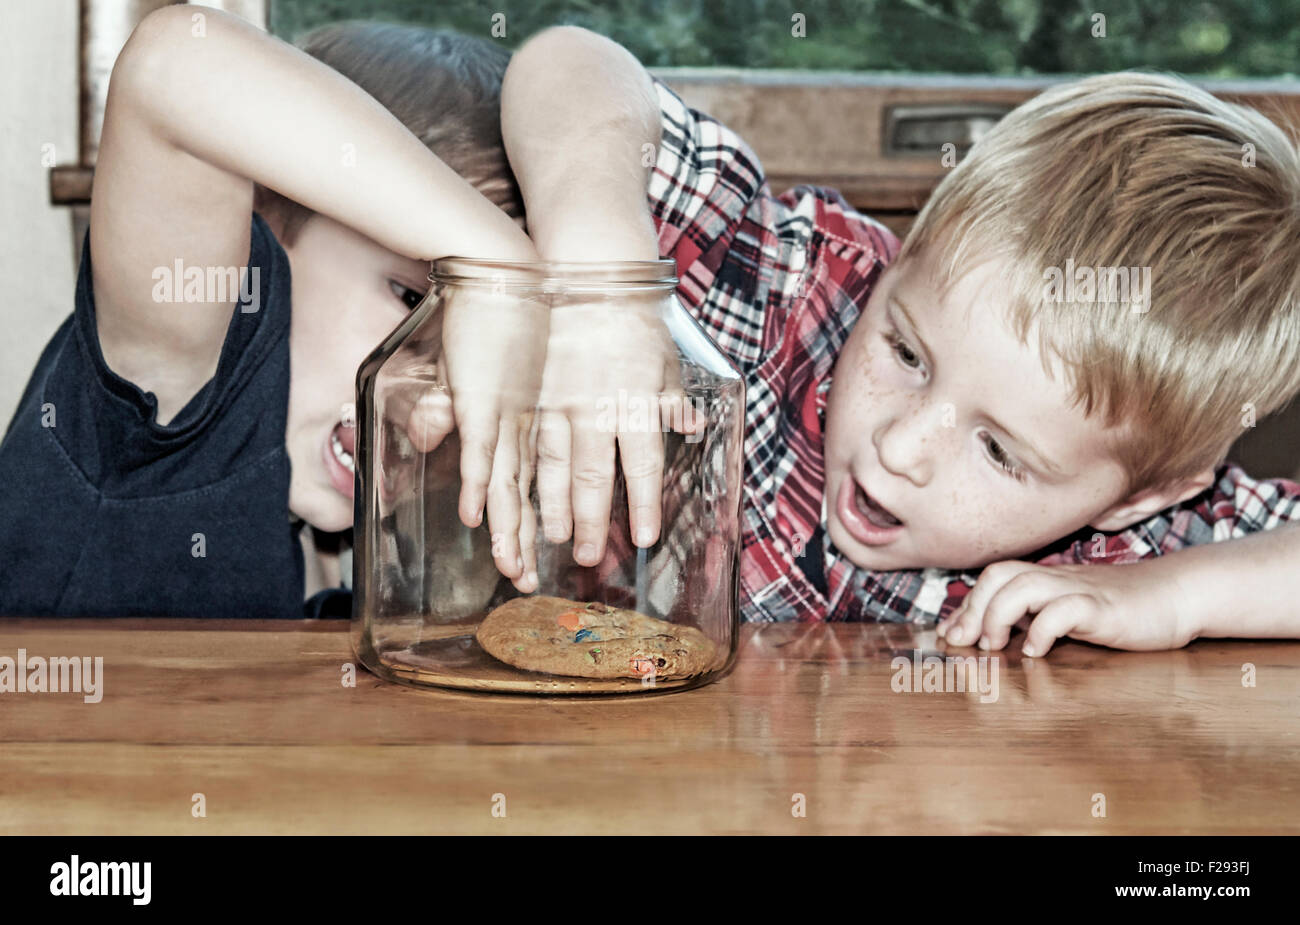 Two boys compete and reach for last cookie Stock Photo